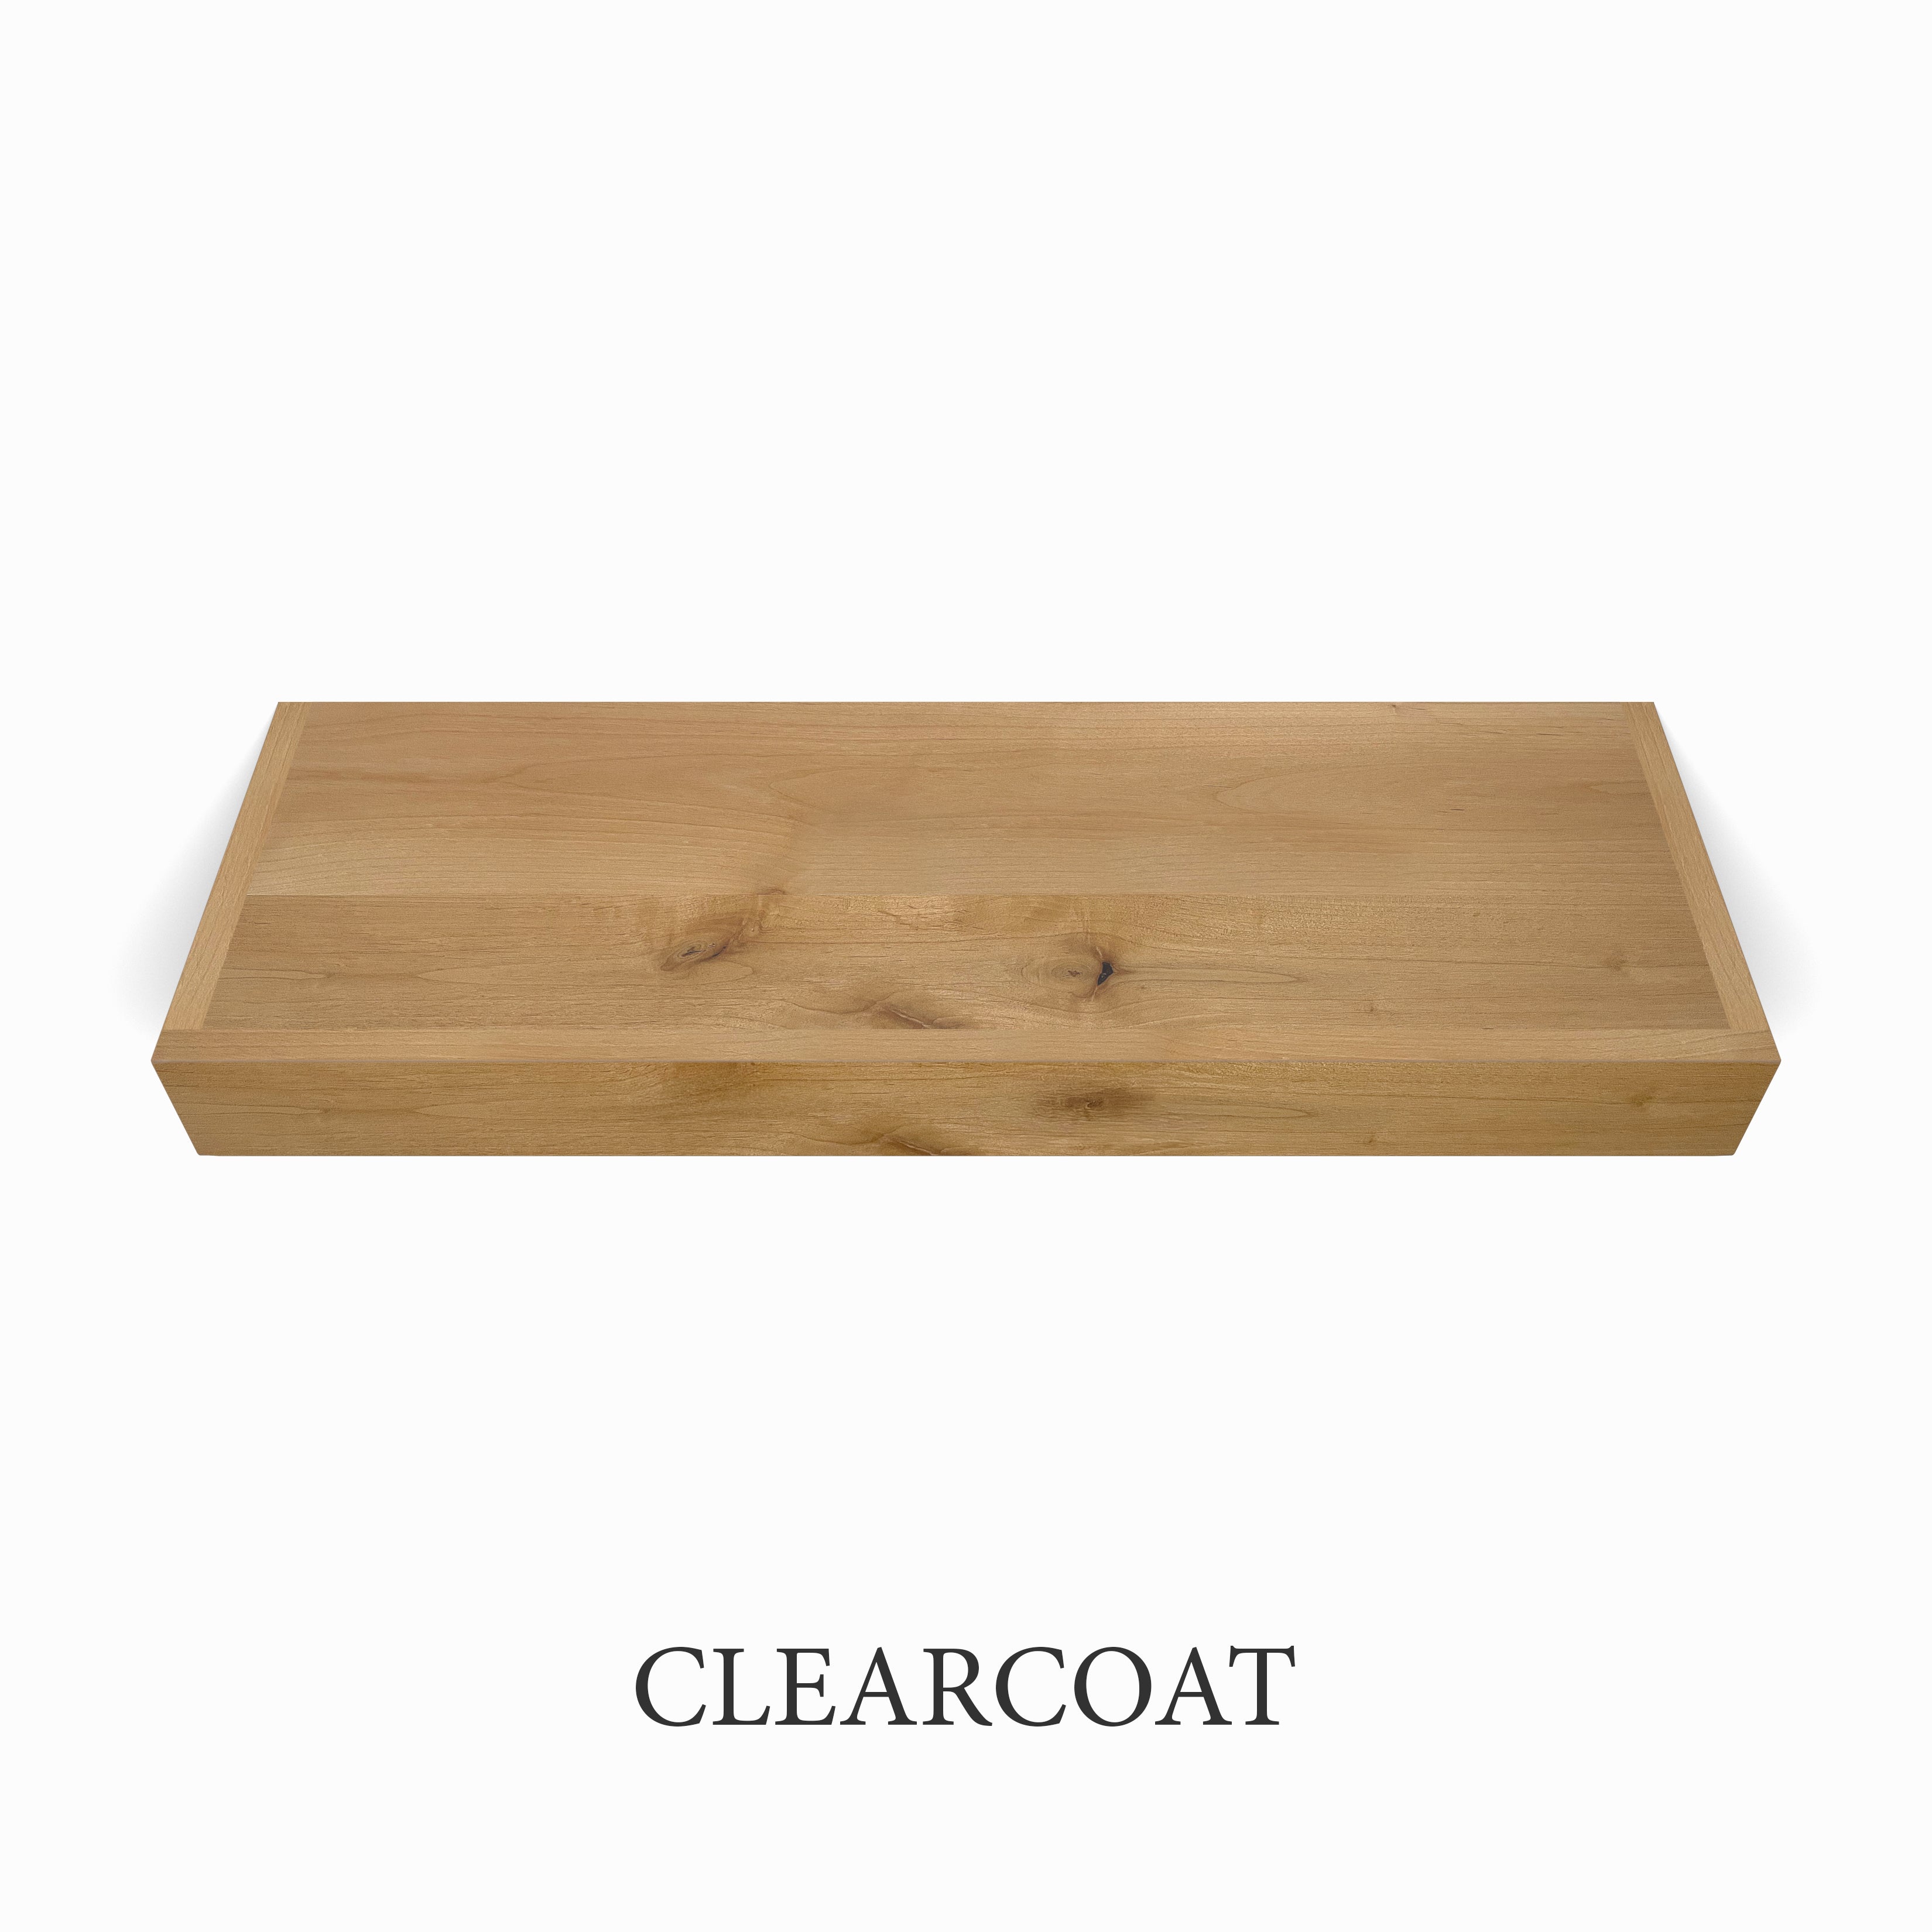 clearcoat Rustic Alder 3 Inch Thick Floating Shelf